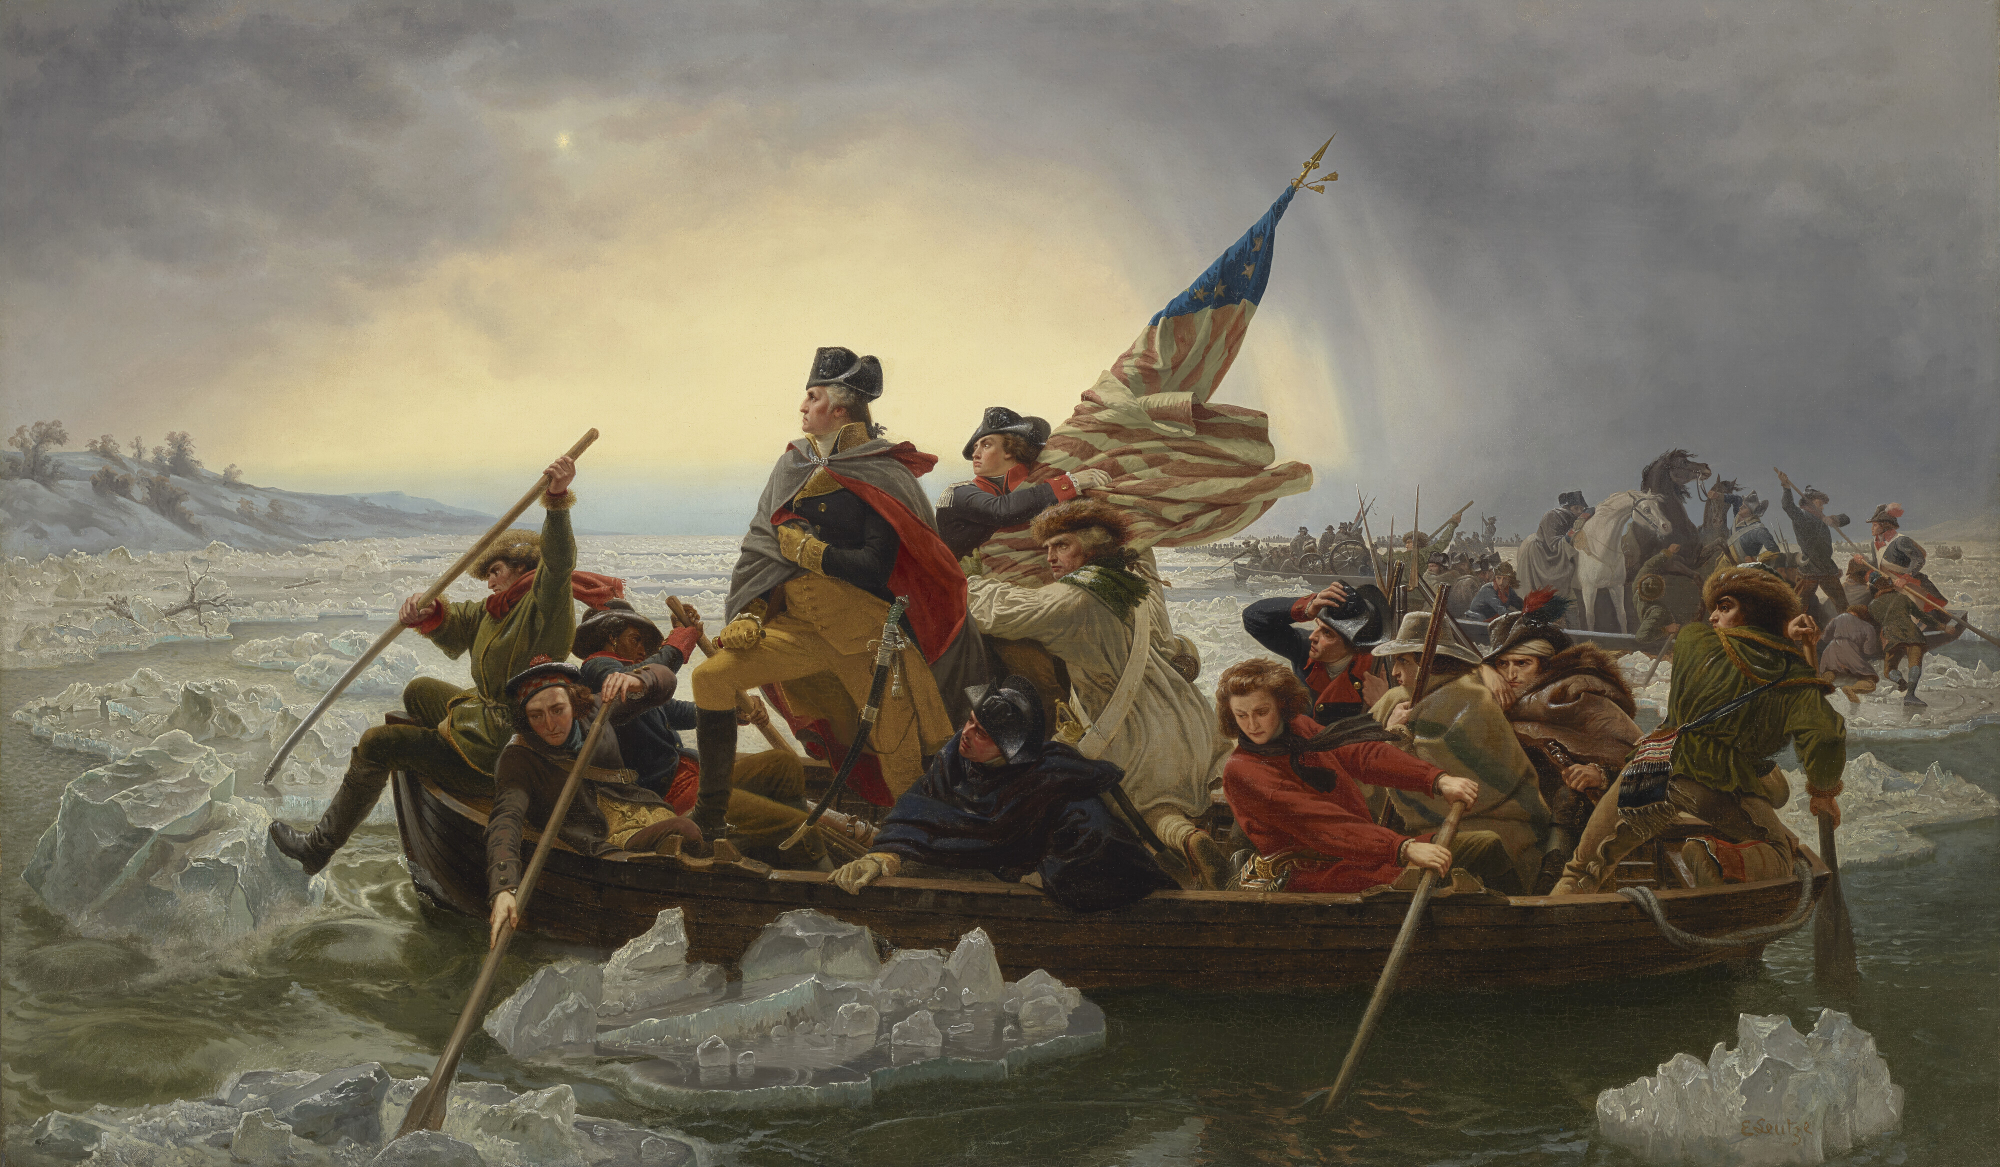 Washington Crossing the Delaware Offered in Christie’s 20th Century Evening Sale